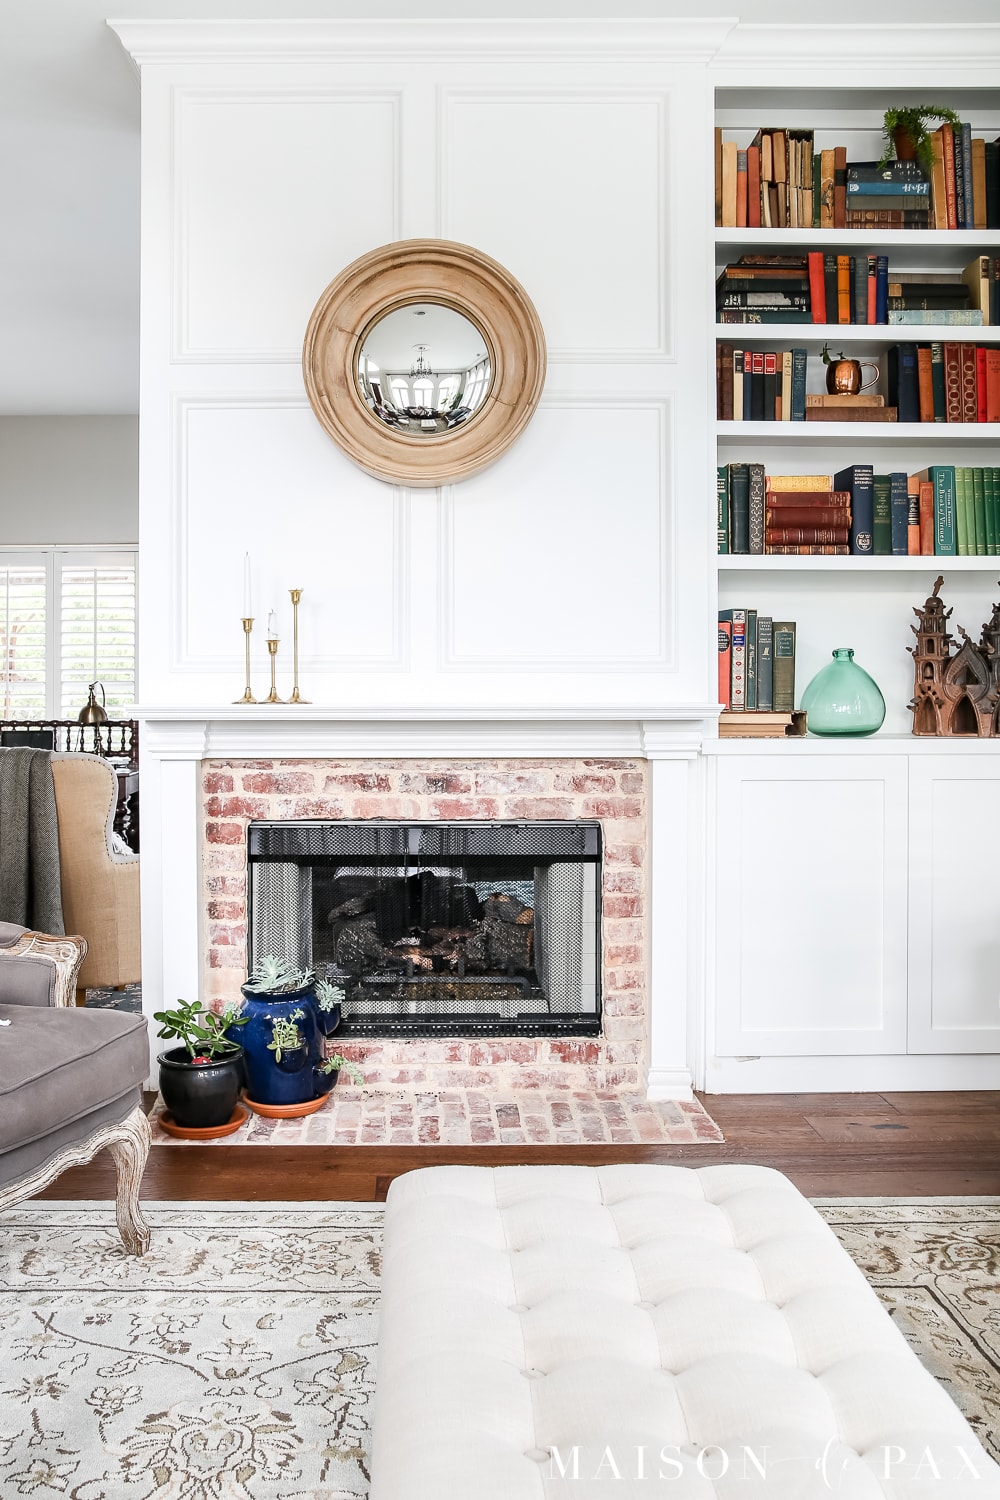 White painted fireplace with built-in bookshelf and styled with modern farmhouse accessories- Maison de Pax